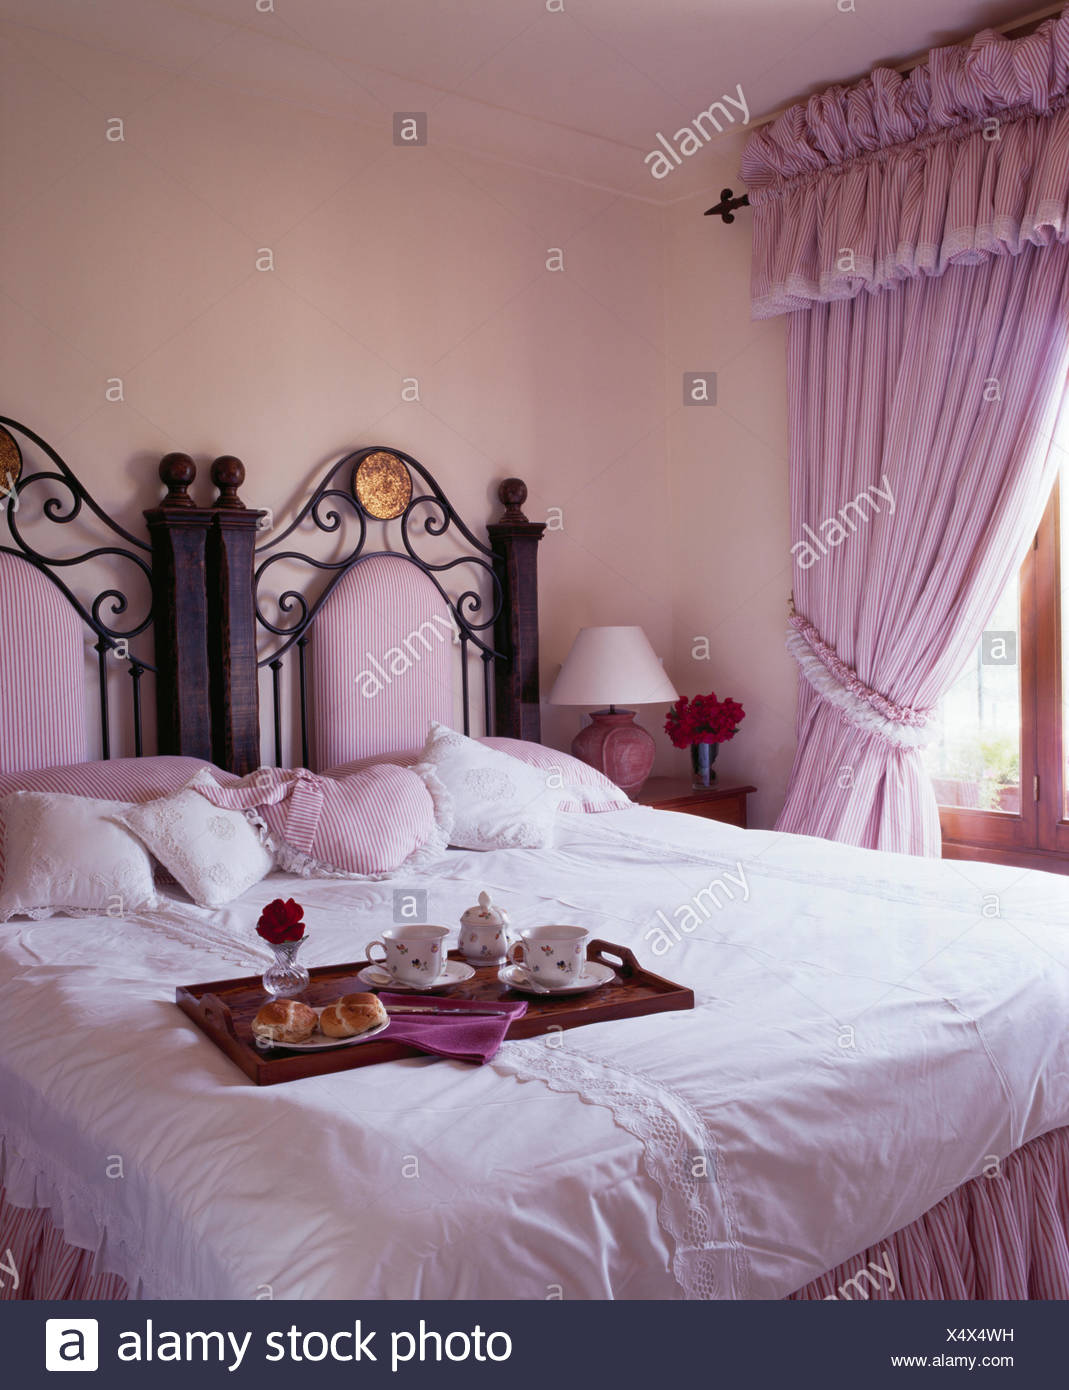 Breakfast tray on a wrought iron antique bed with white duvet in ...